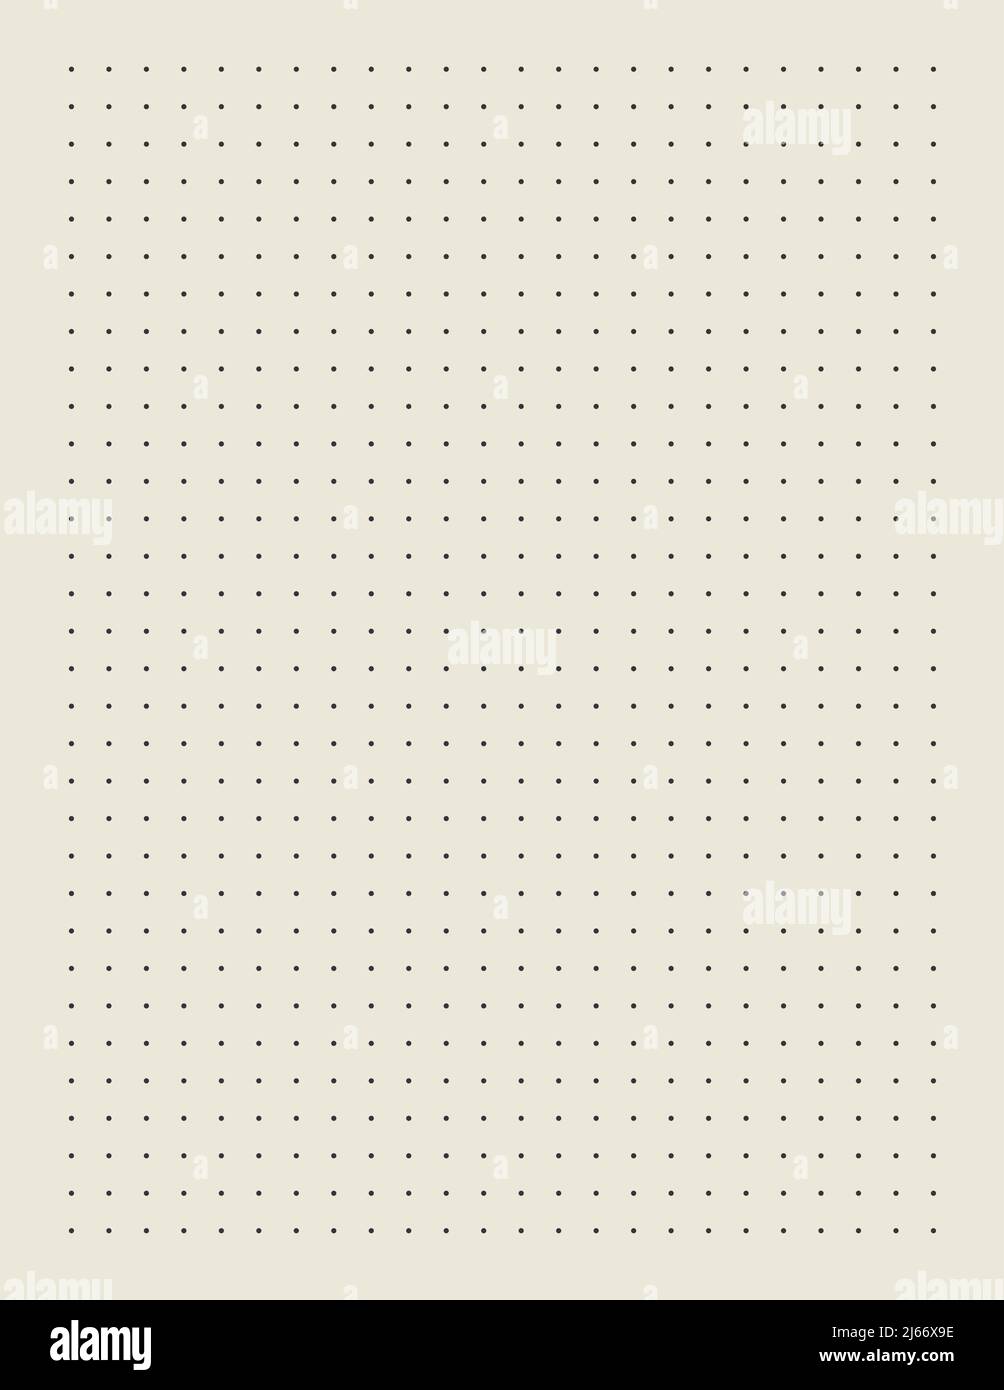 Graph paper. Printable dotted grid paper on white background